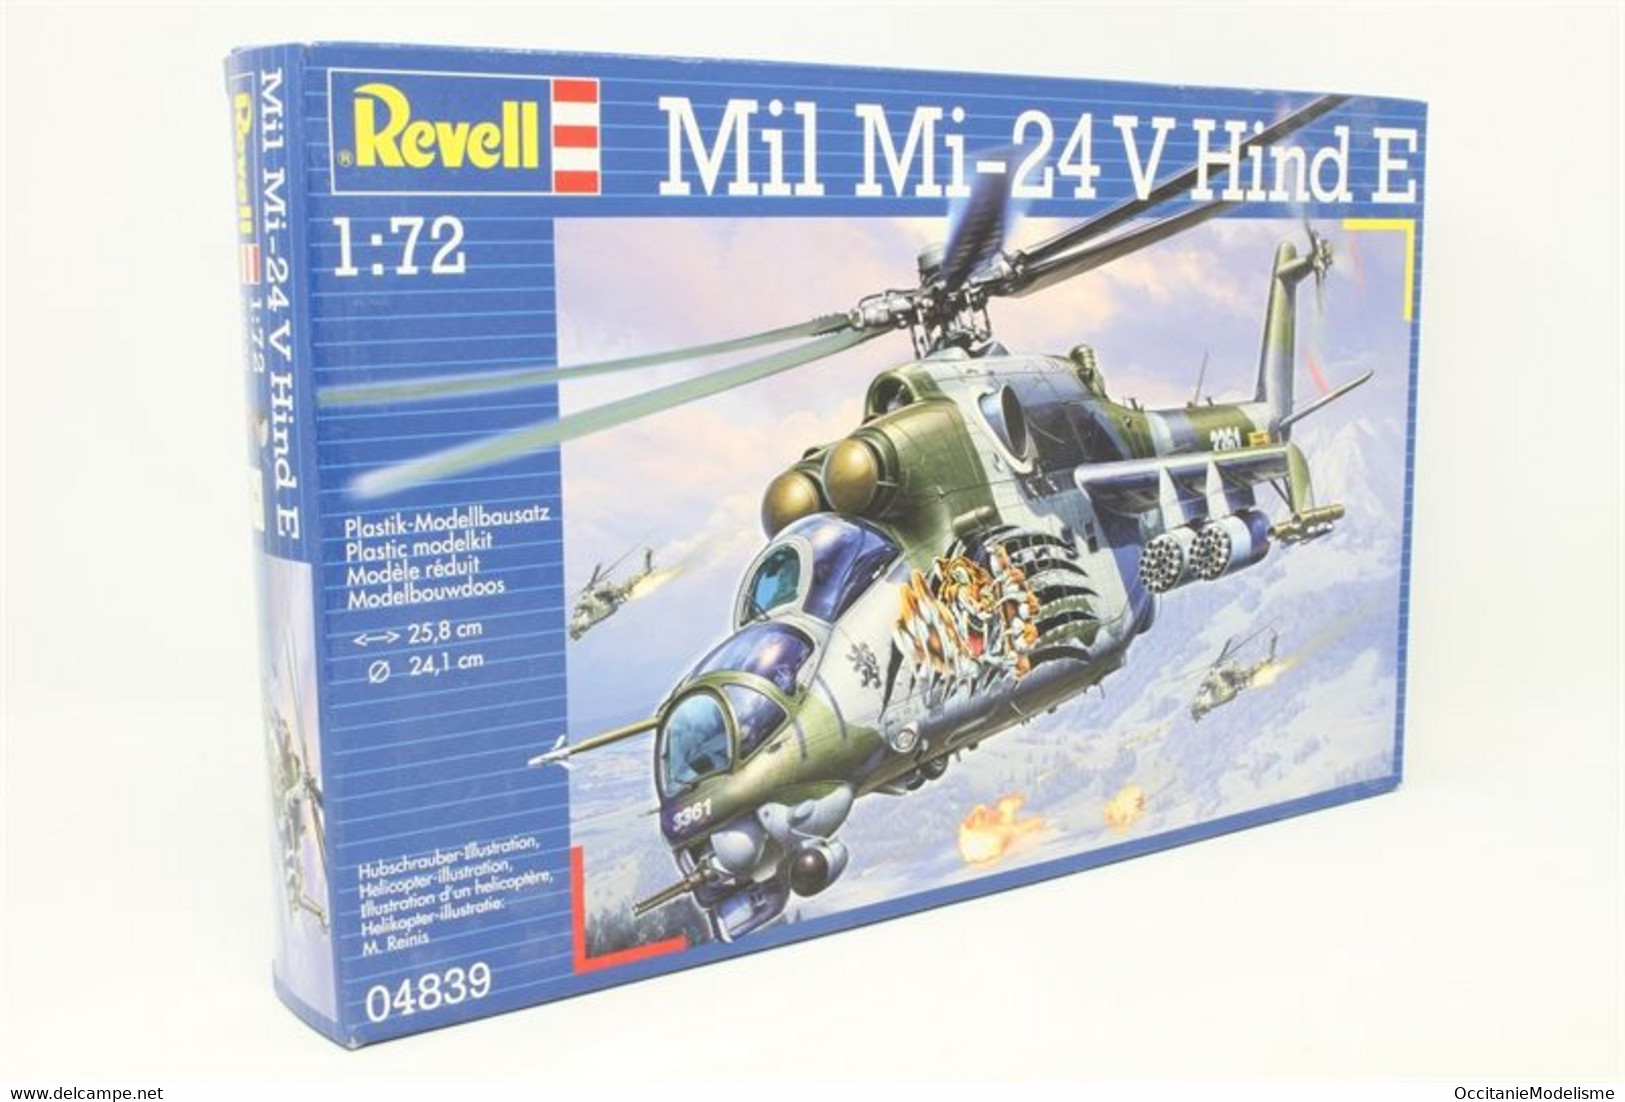 Revell - MIL Mi-24 V Hind E Maquette Hélicoptère Kit Plastique Réf. 04839 Neuf NBO 1/72 - Helikopters